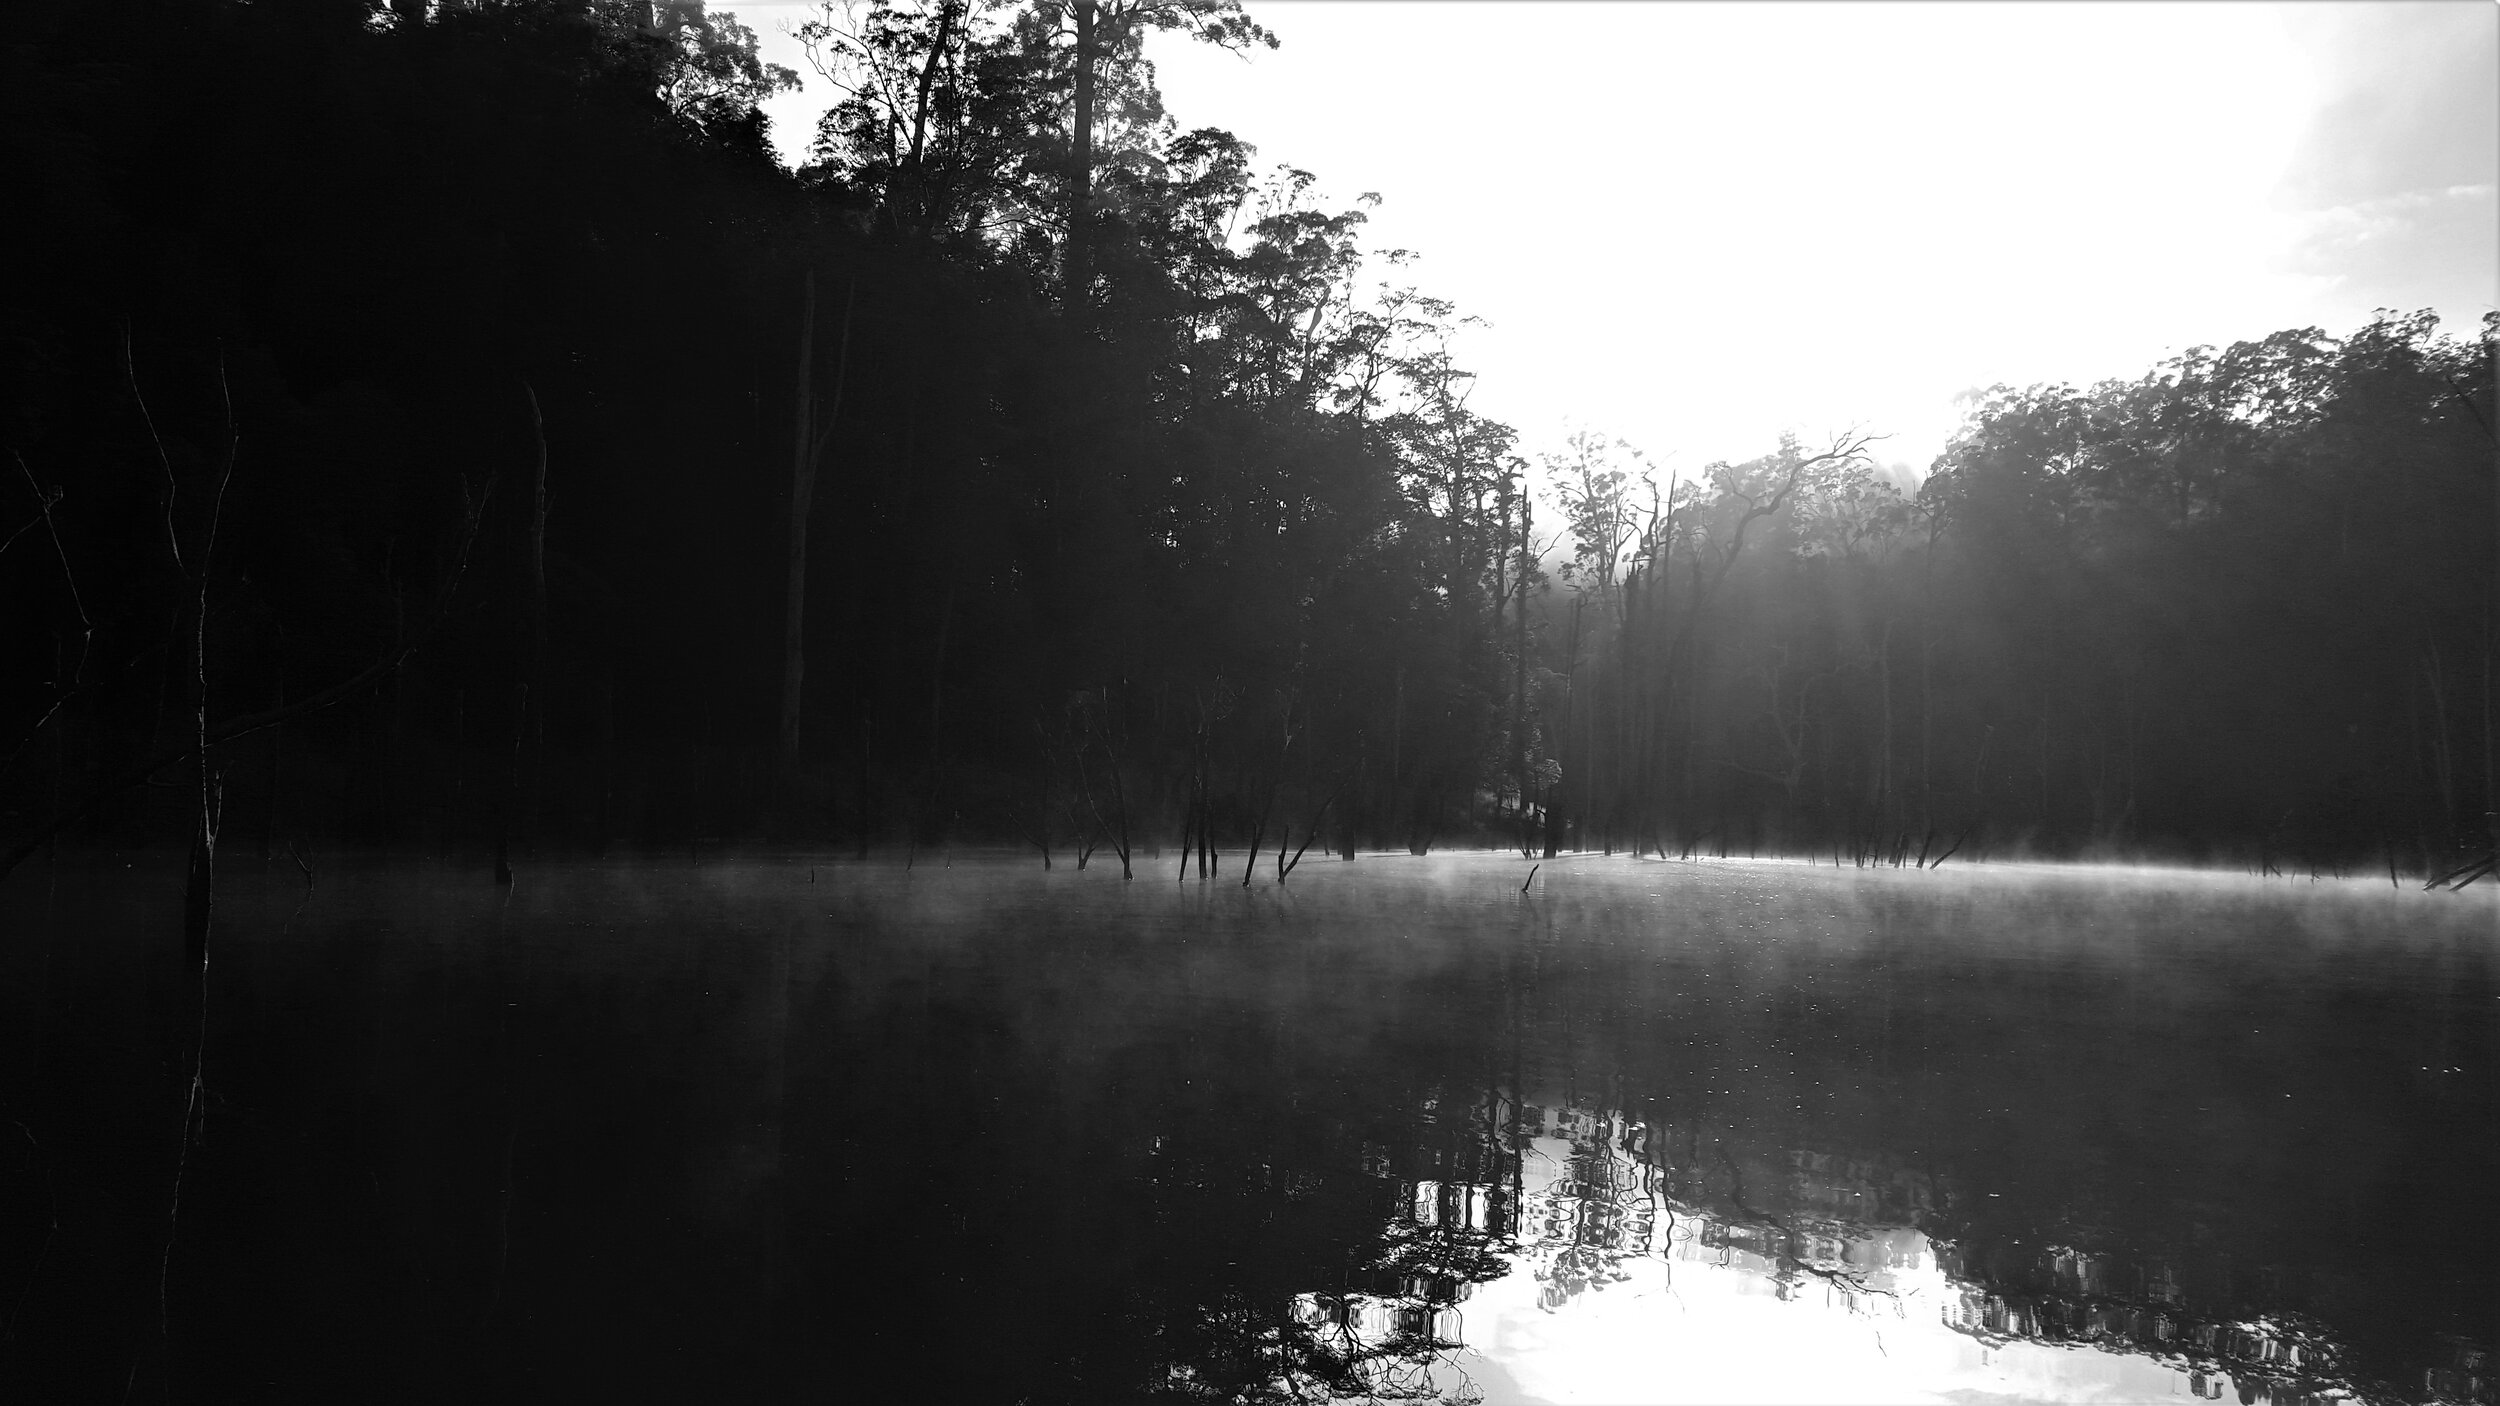 early morning mist on mysterious water B&W sue moxon.jpg